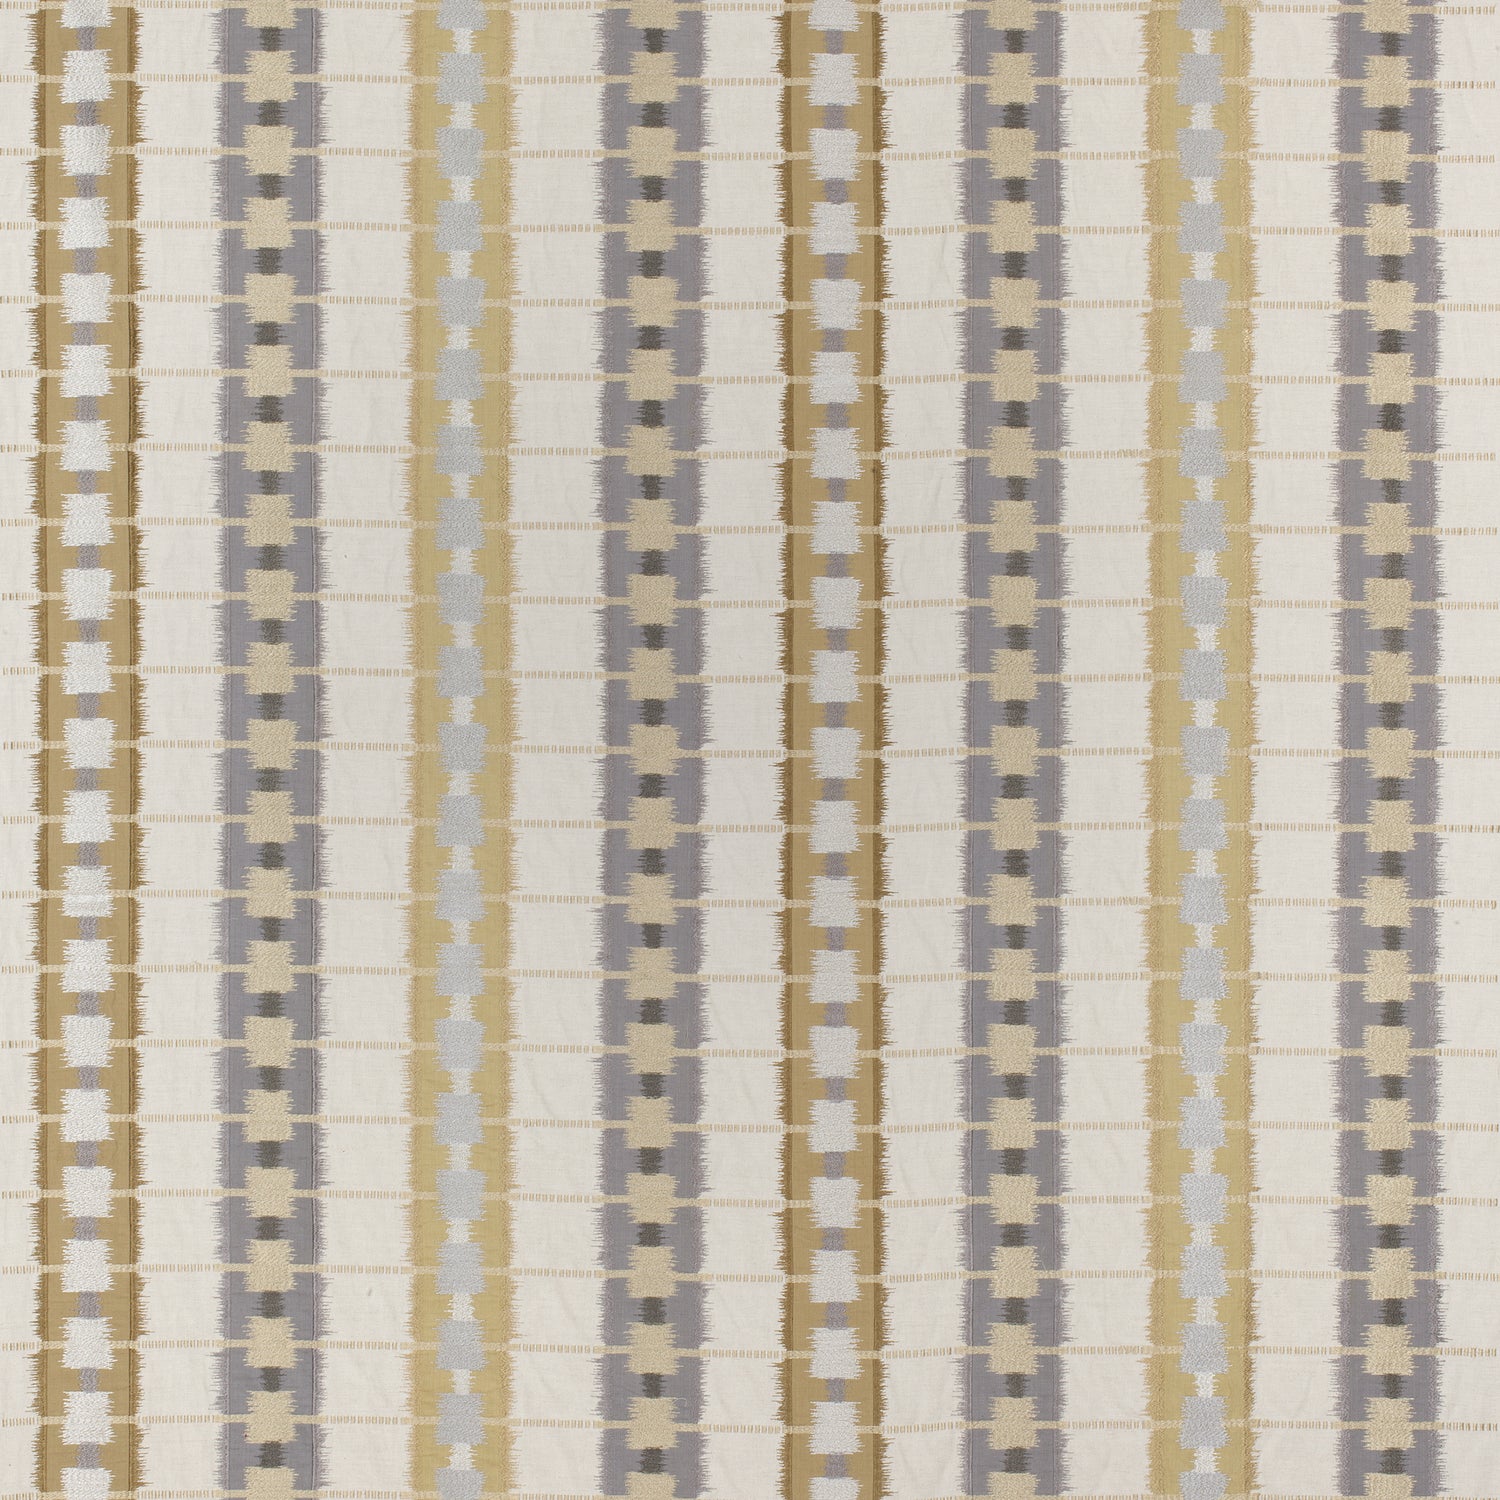 Sri Lanka Embroidery fabric in grey color - pattern number W788712 - by Thibaut in the Trade Routes collection